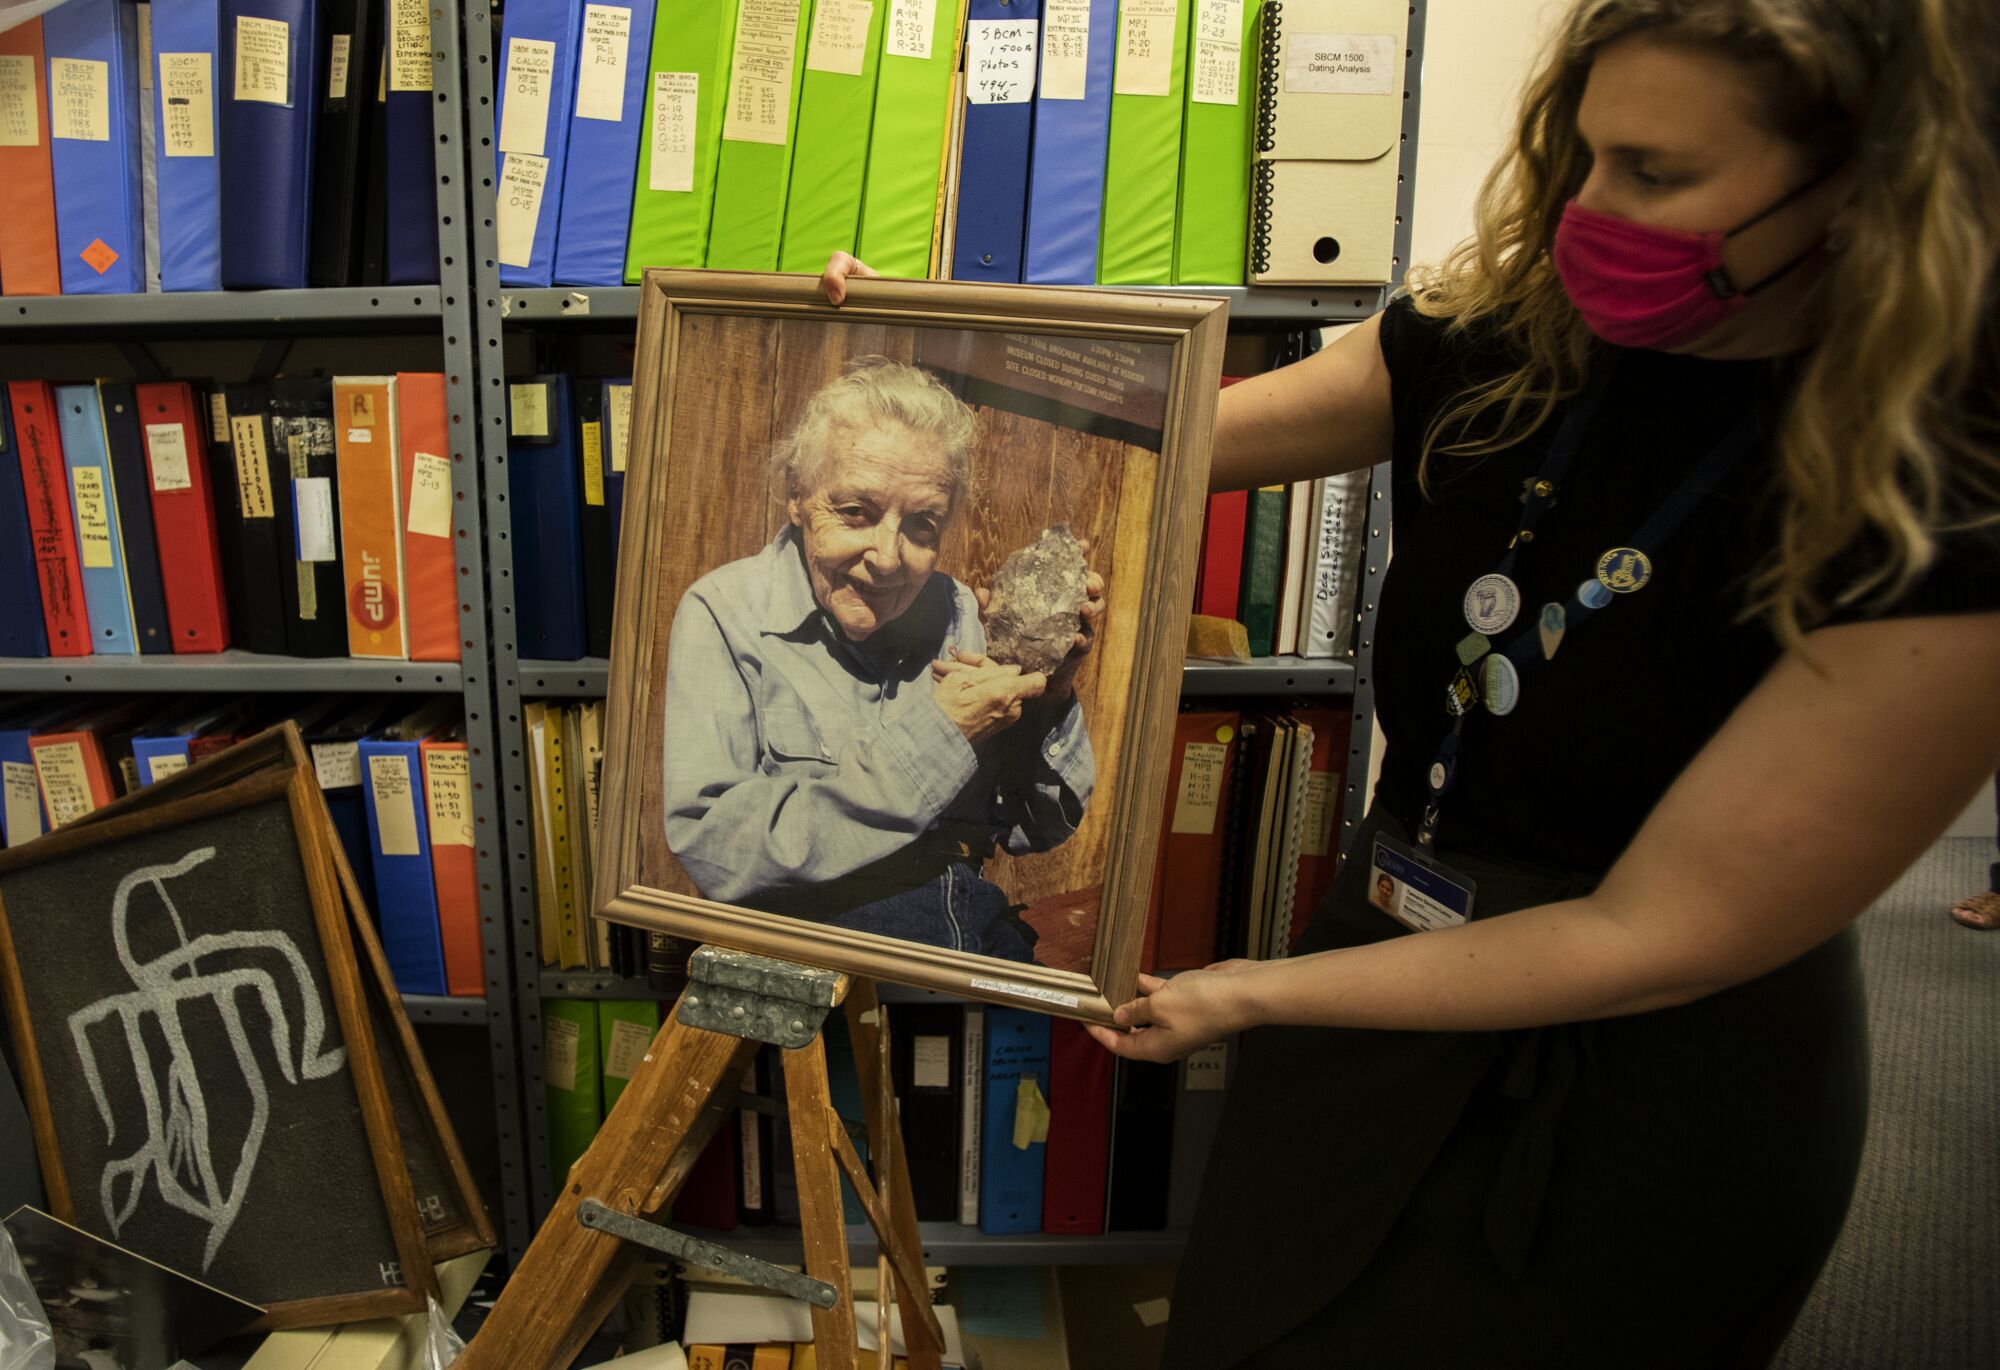 A woman displays a framed portrait of an older woman holding up an ancient stone tool.